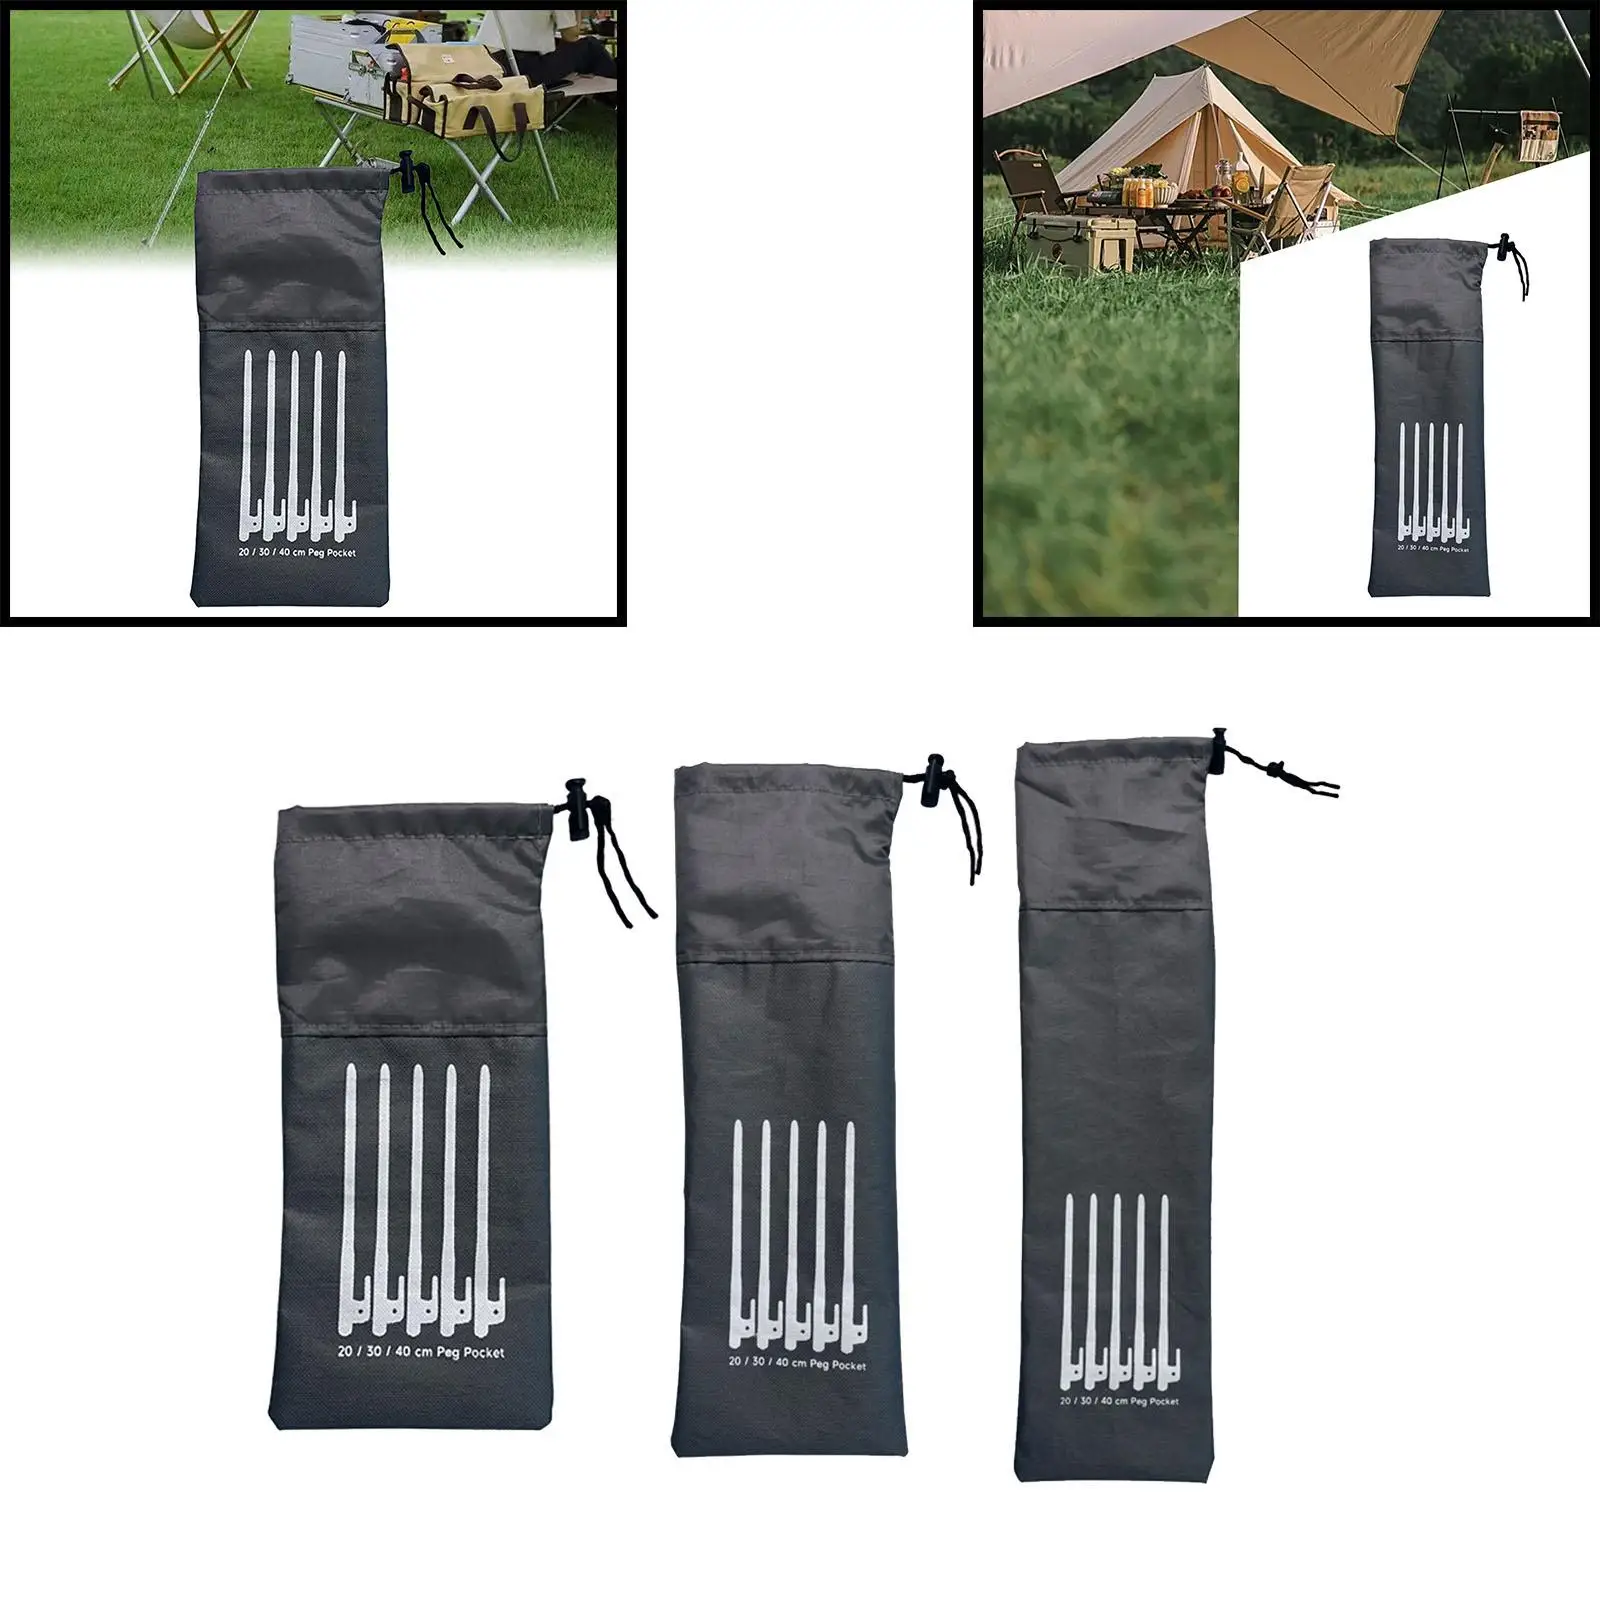 

Tent Stakes Storage Bag Ultralight Utility Tools Organizer Holder Tent Peg Nails Bag for Outdoor Fishing Camp Tarp Tent Garden